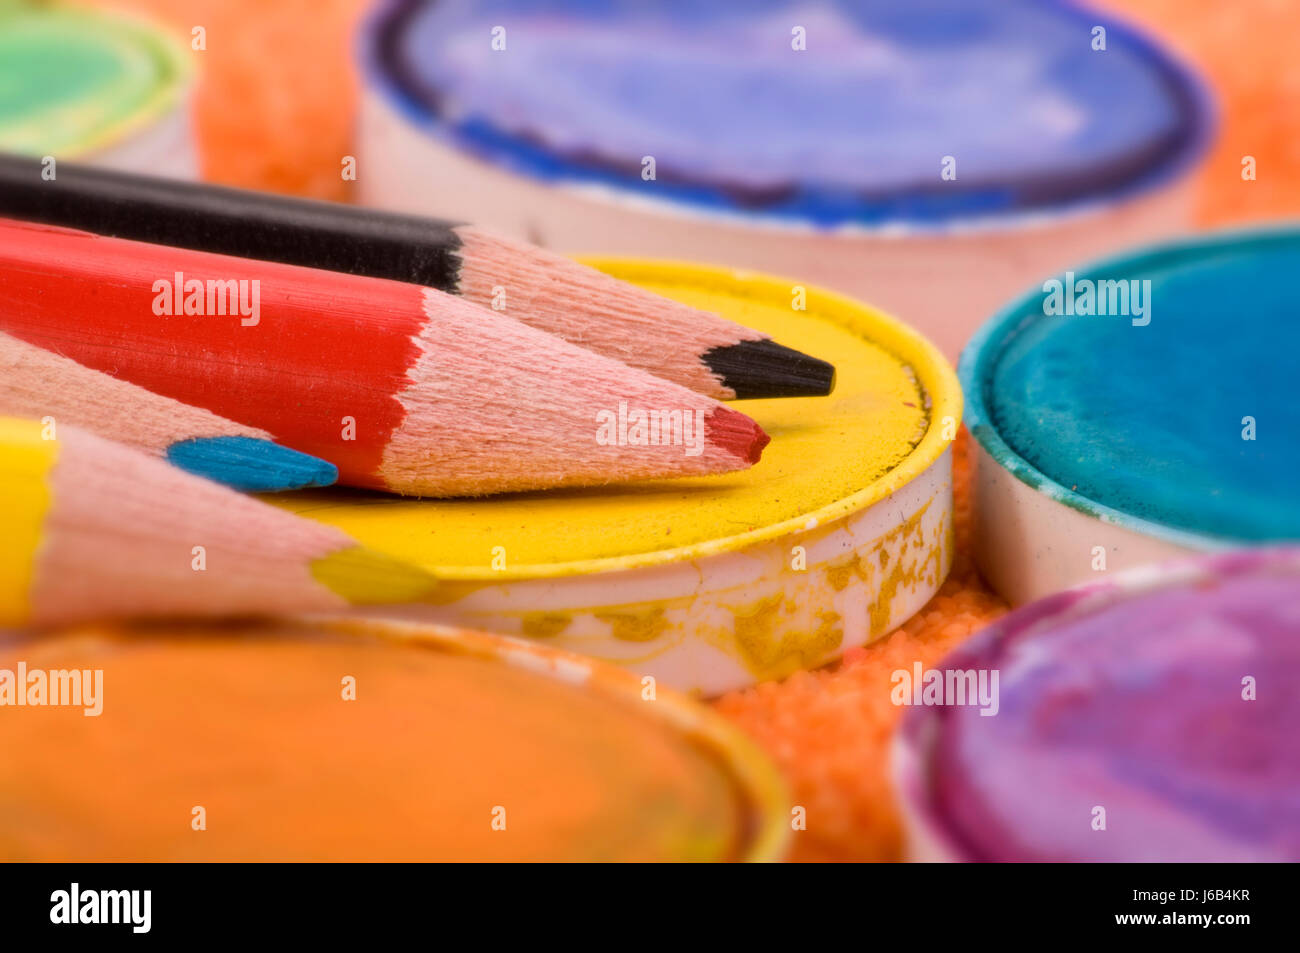 crayons and paint pots Stock Photo